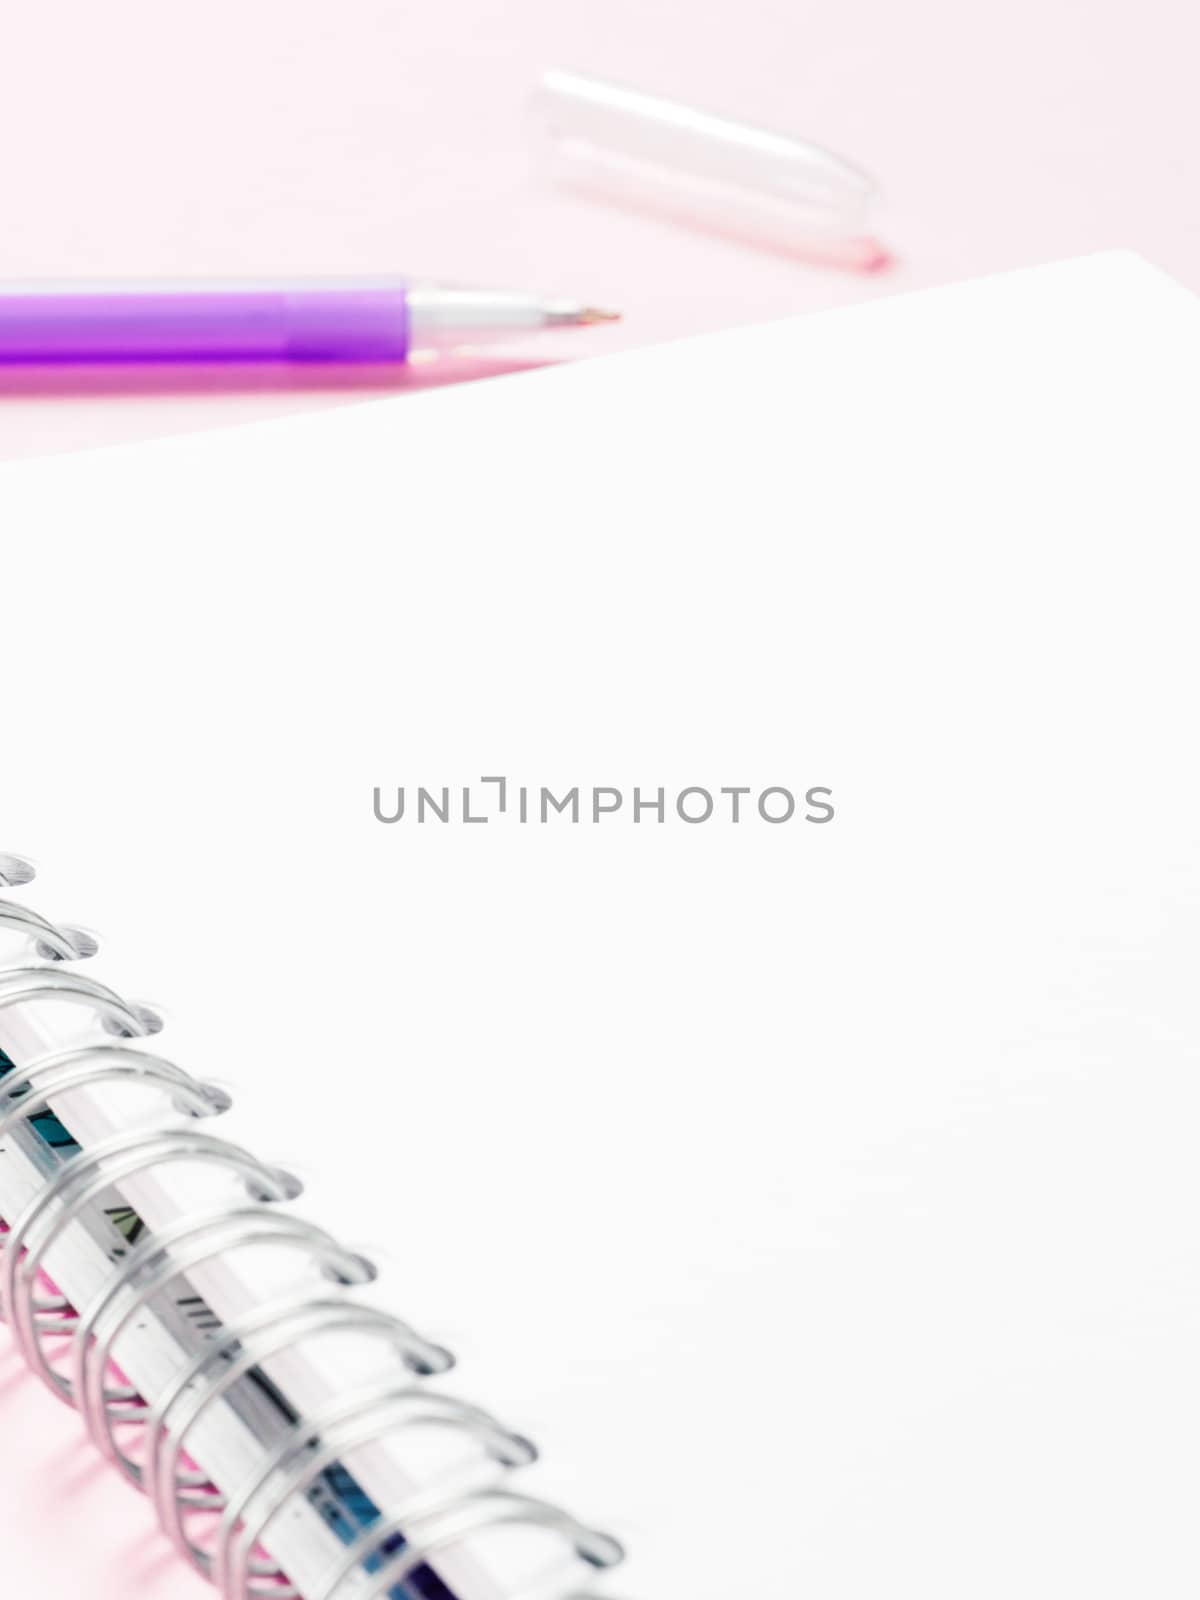 blank note with pen on pink background by fascinadora